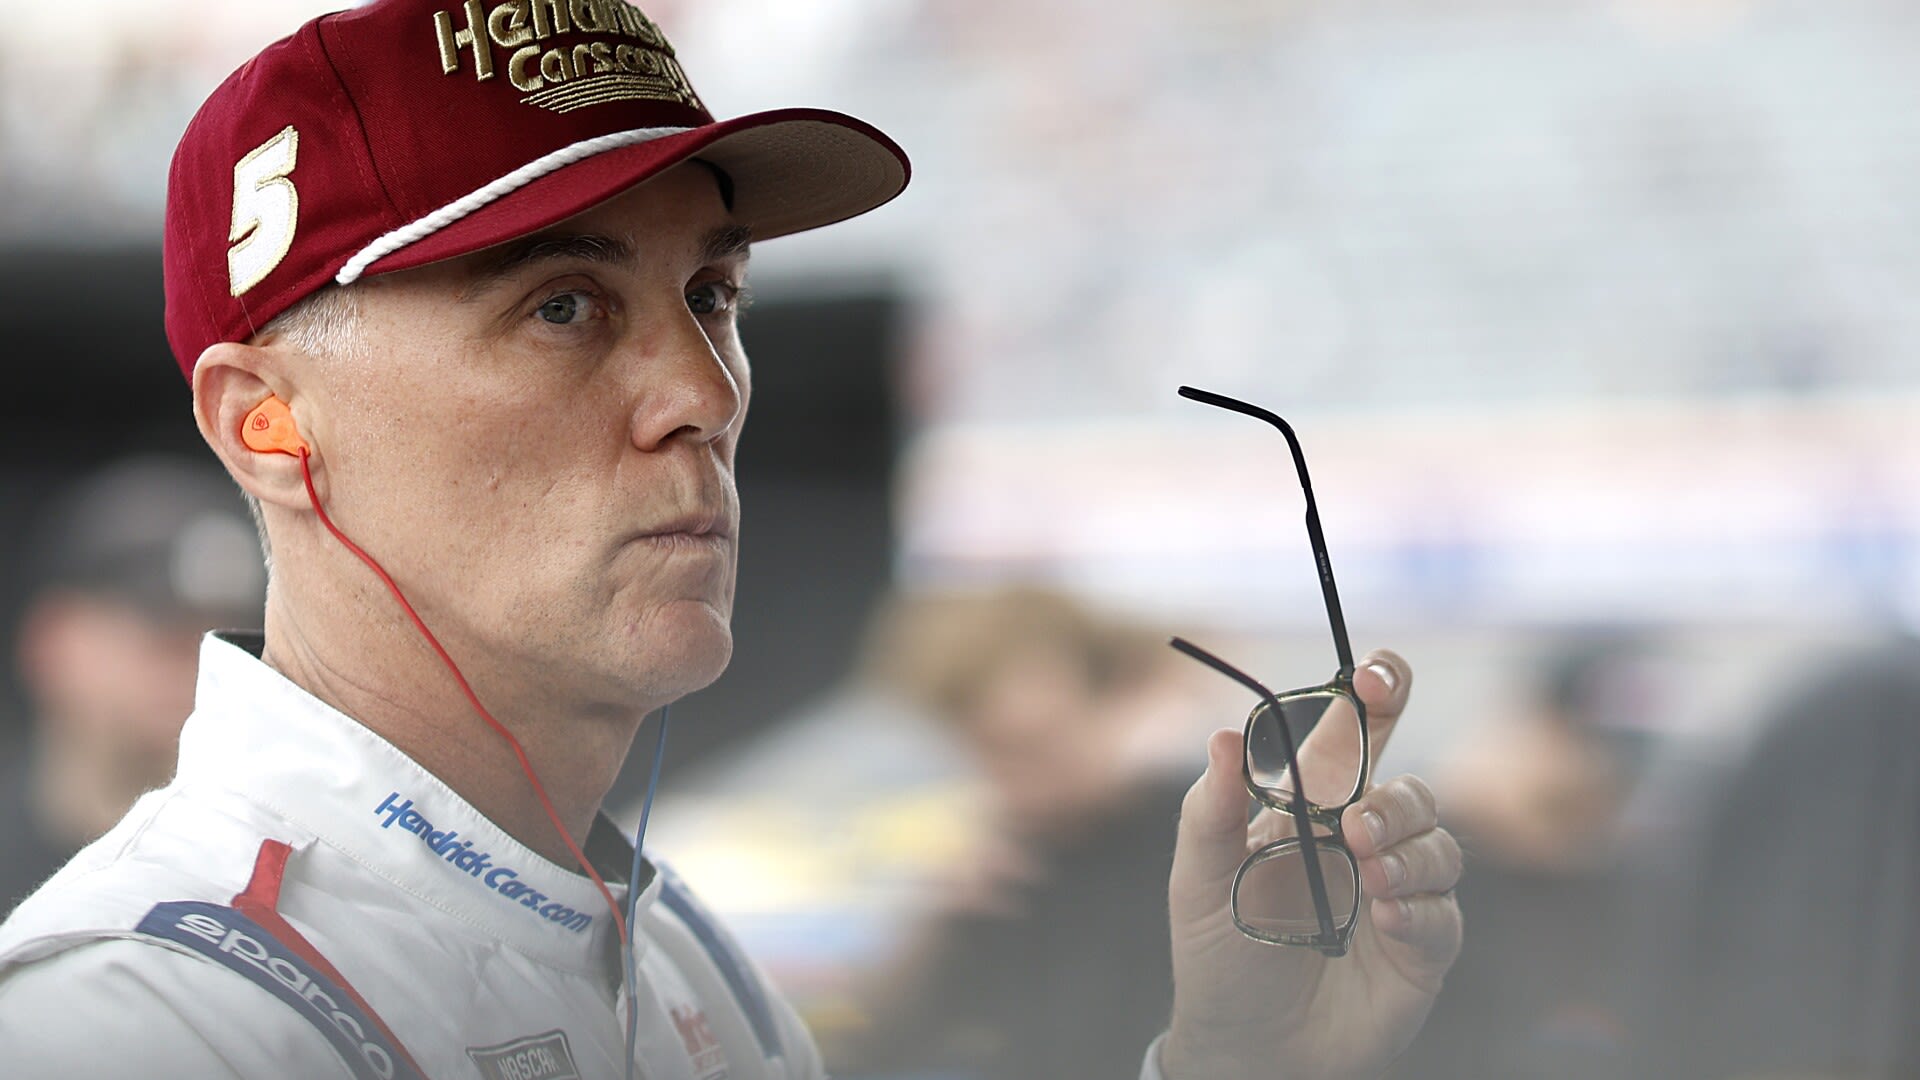 Kevin Harvick relishes time in Kyle Larson's car at North Wilkesboro